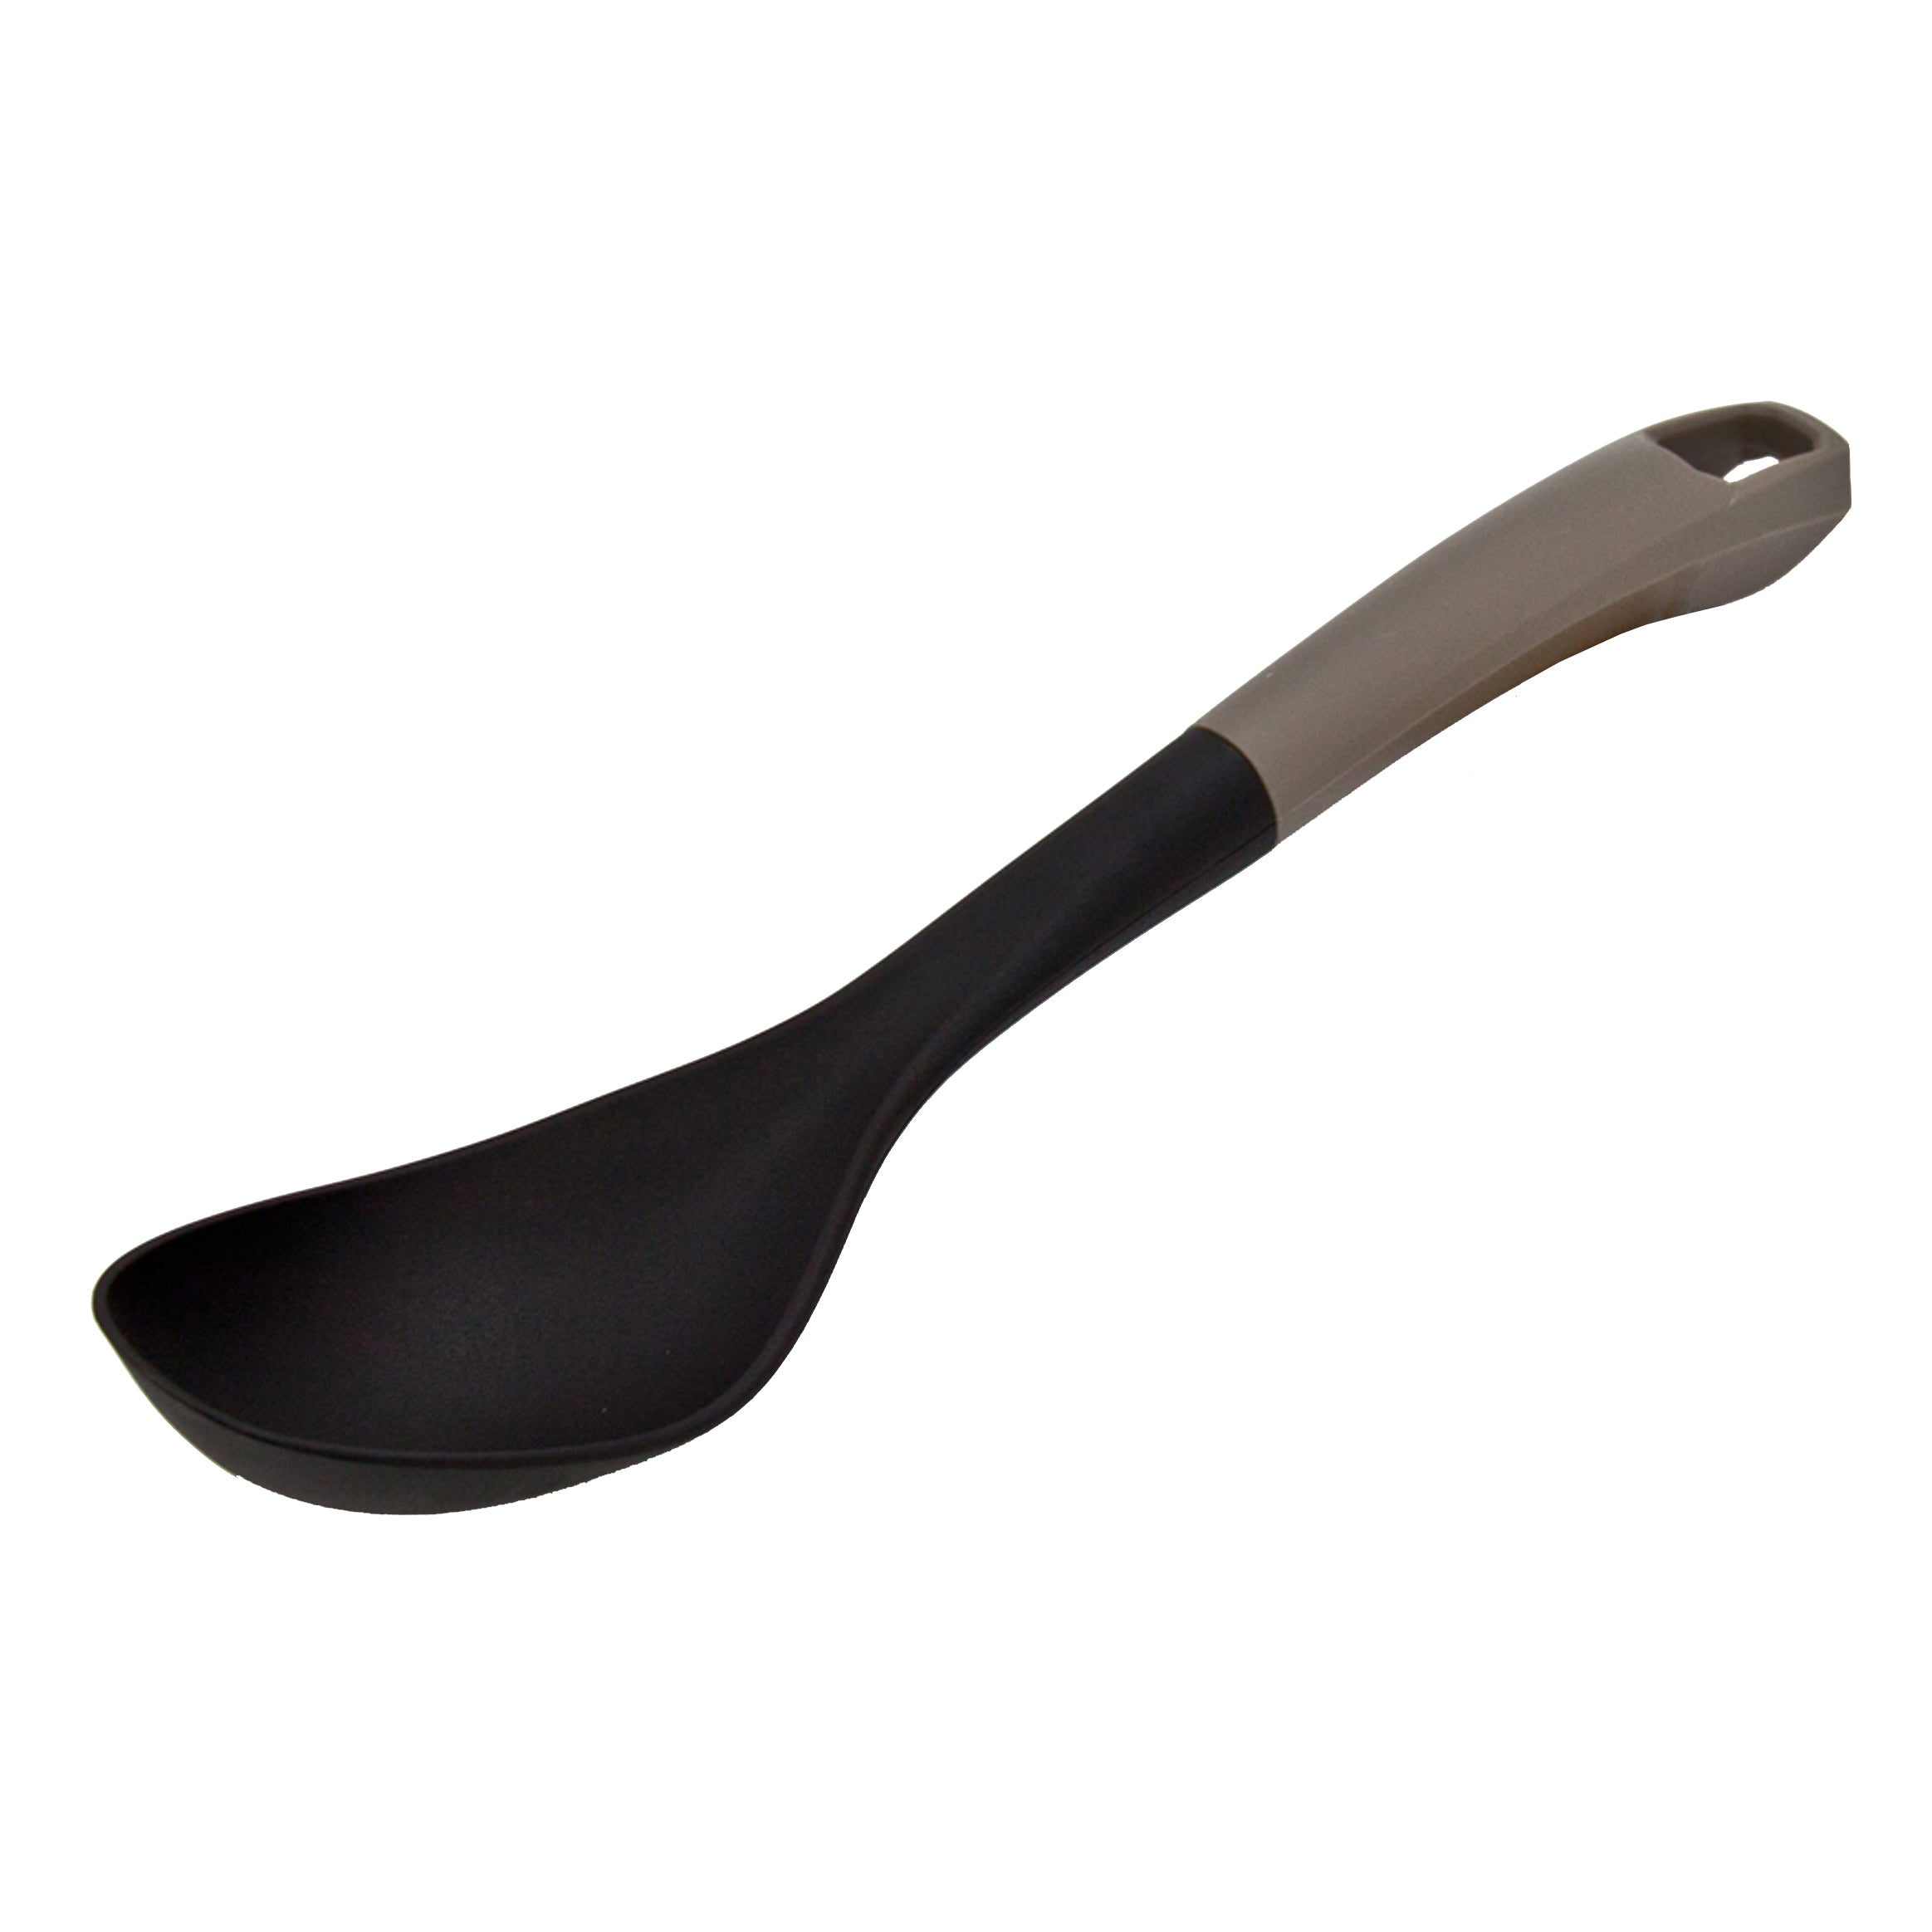 Plastic Spoon With Stone Finished Handle - ELITE - 32 cm